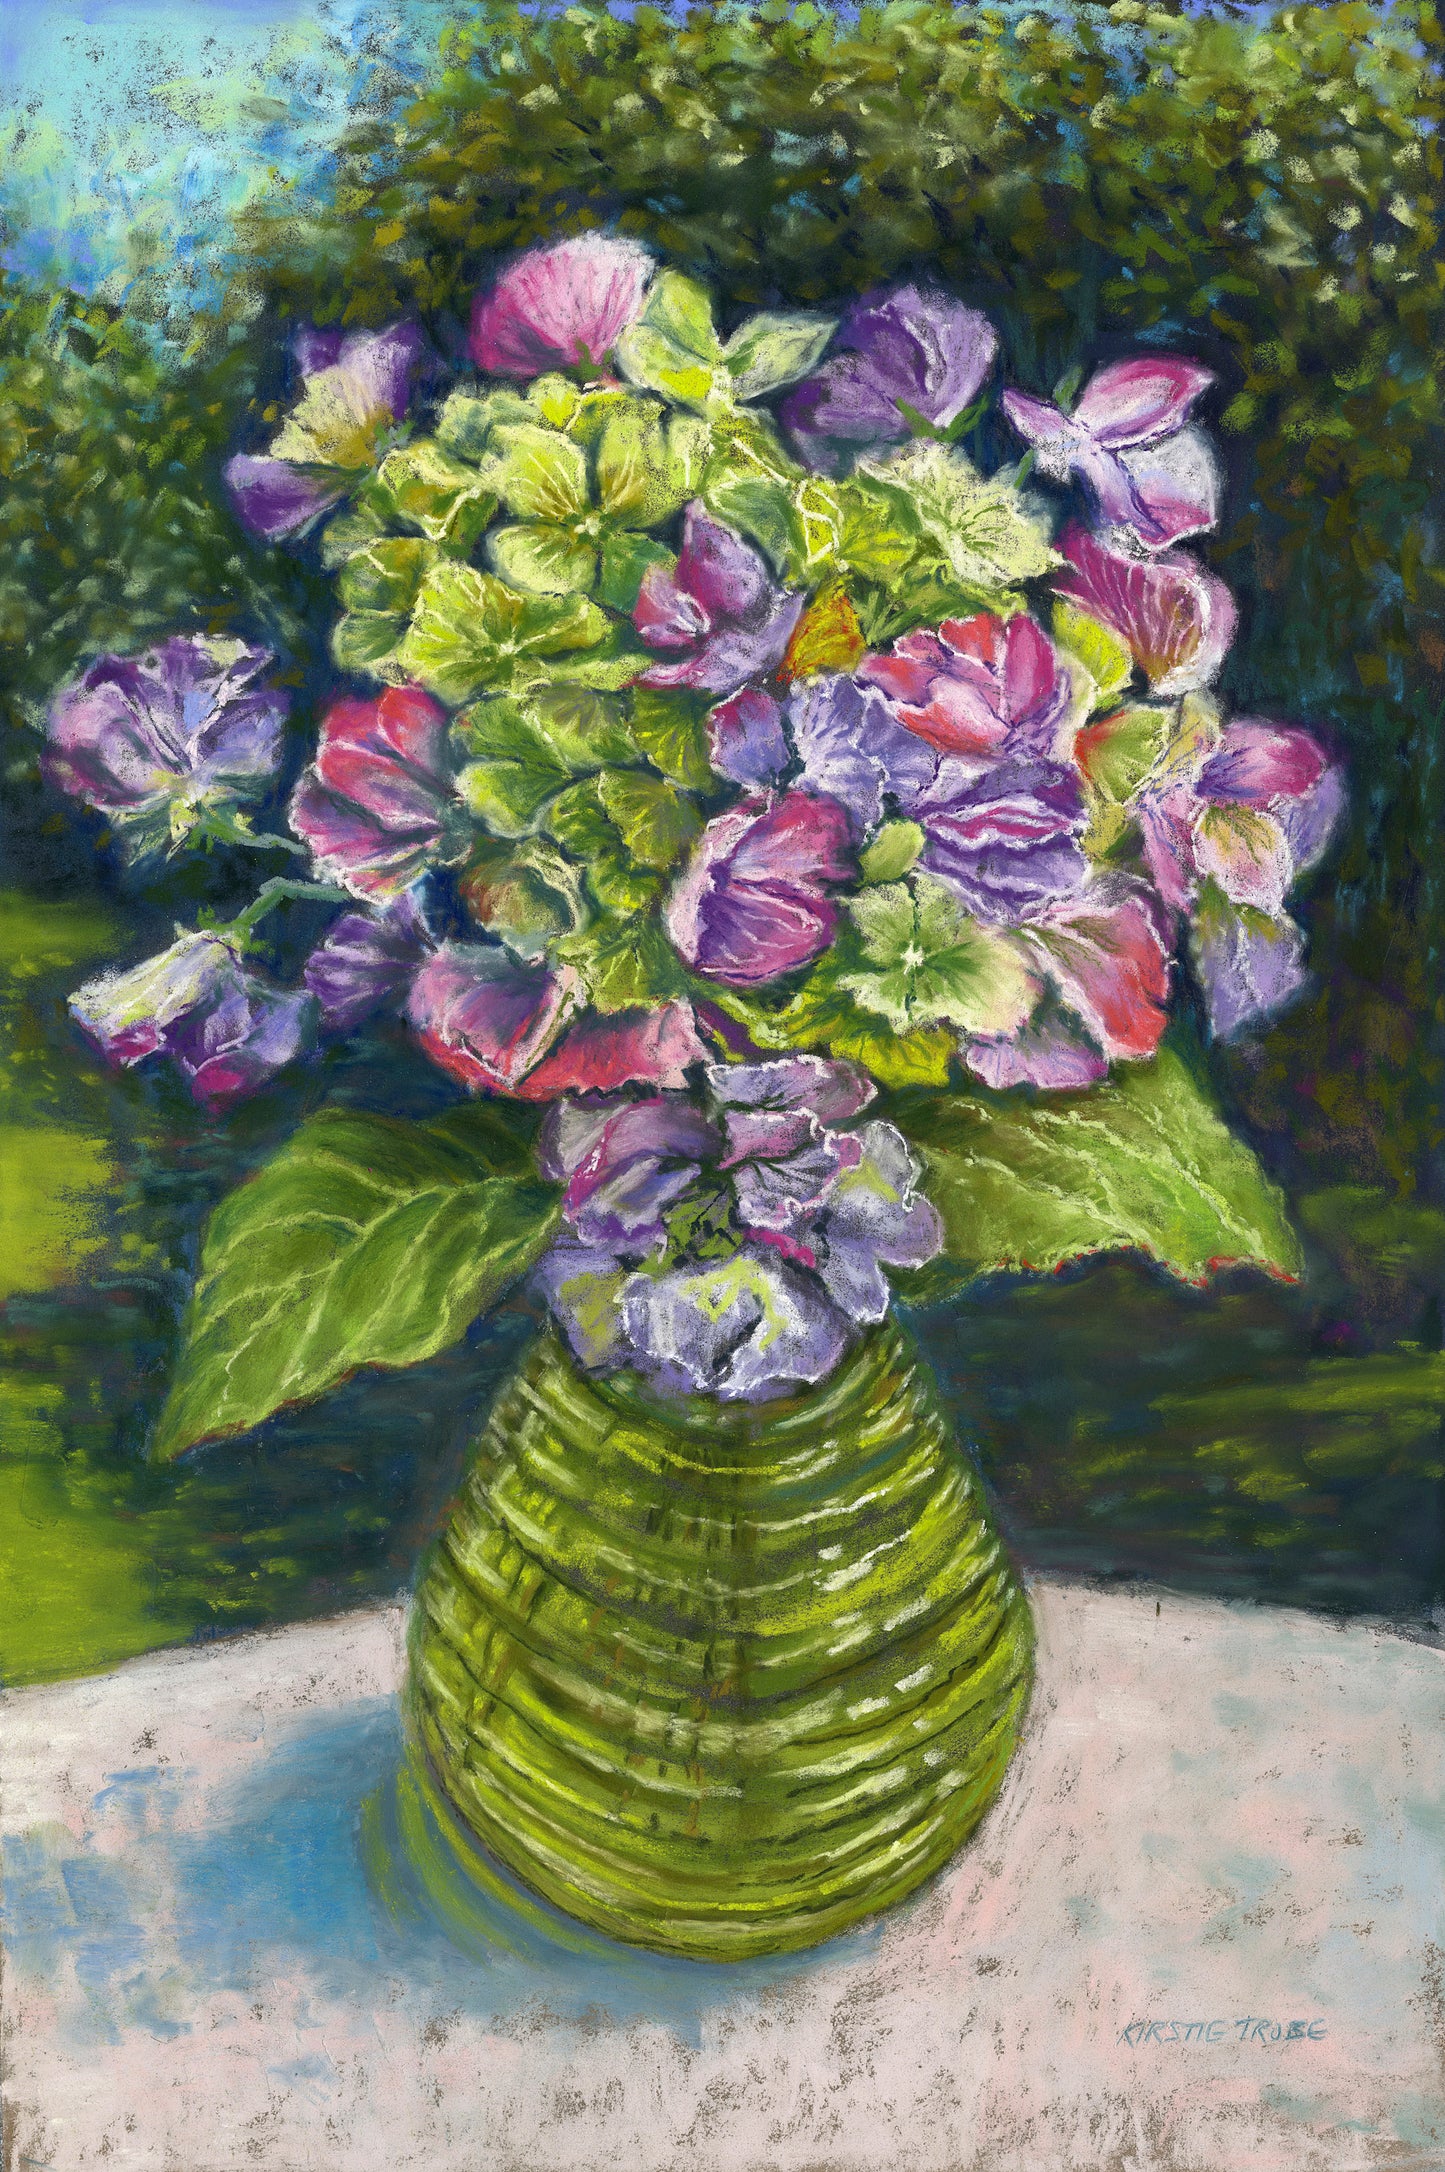 Sweetpeas and hydrangeas in a glass jar on a table cloth with dappled sunlight and trees and garden behind